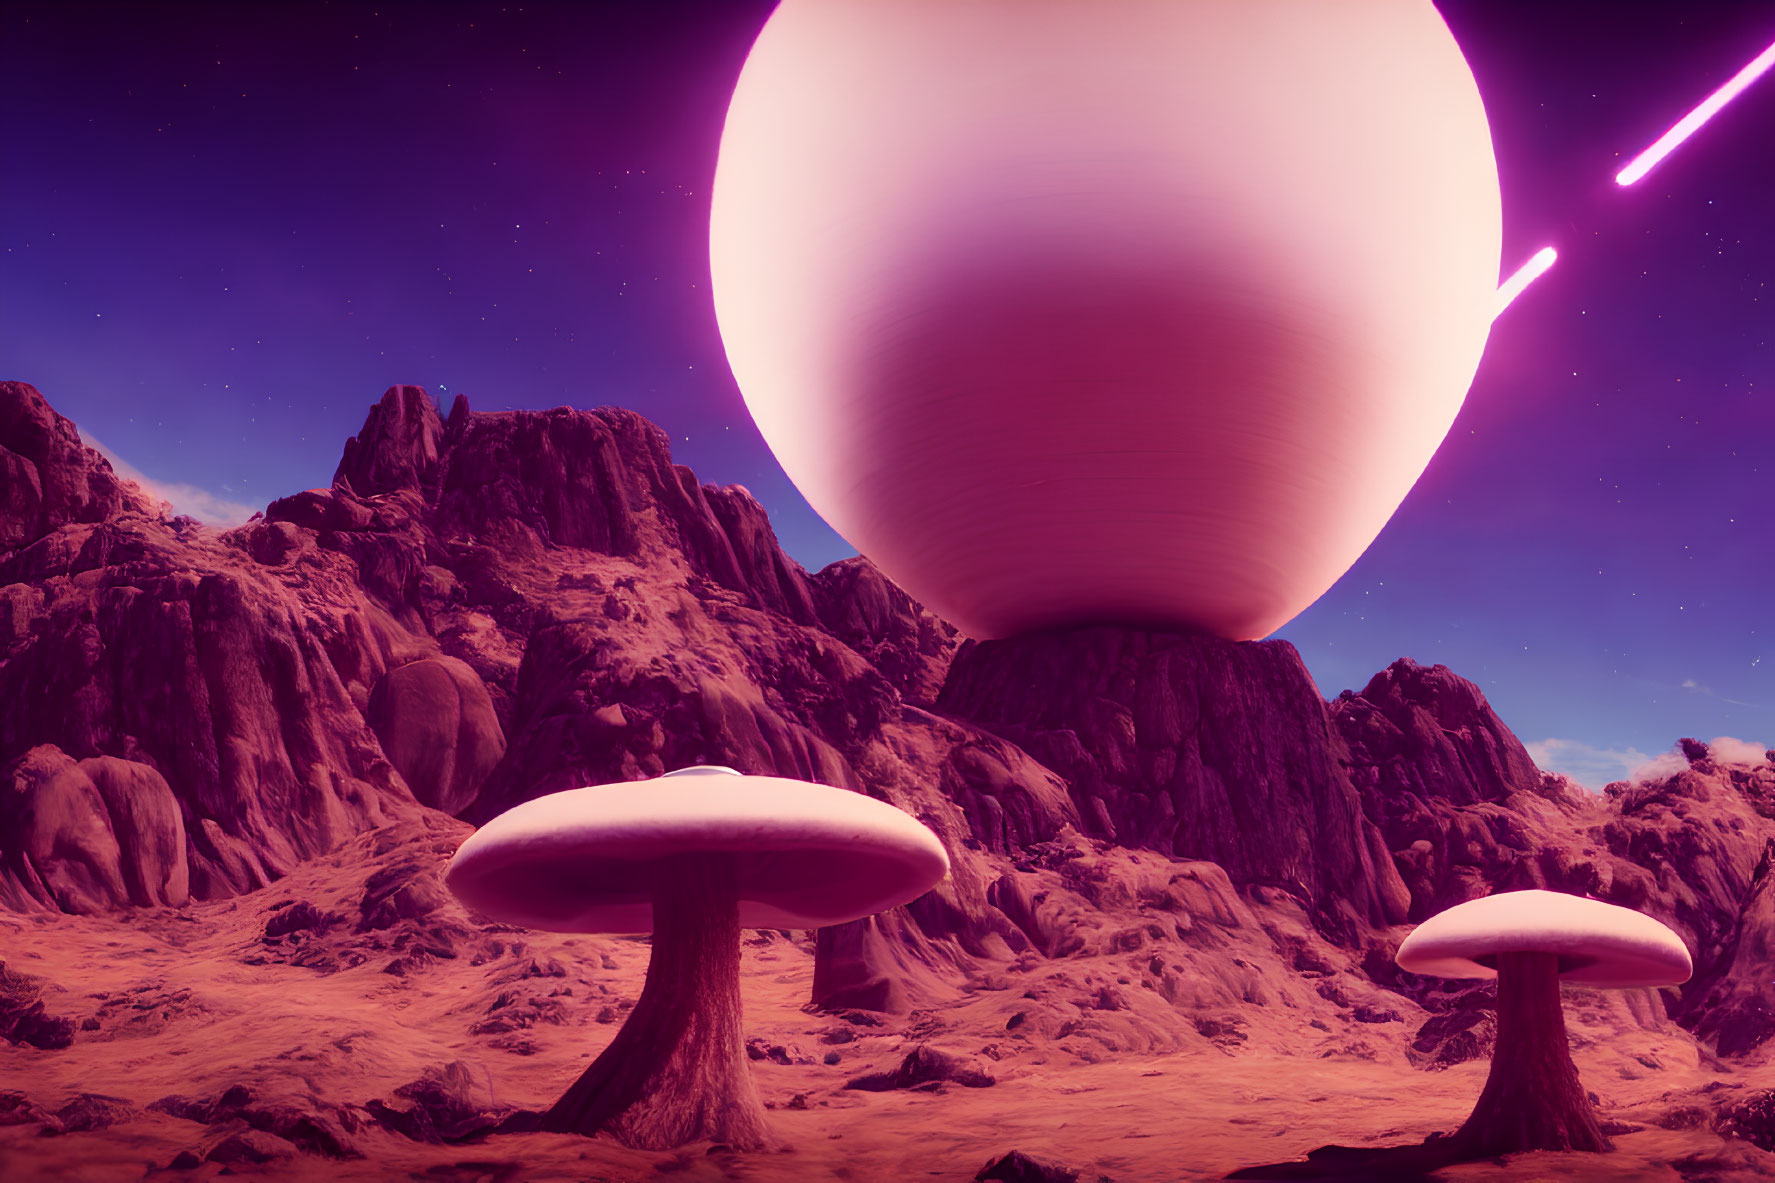 Surreal extraterrestrial landscape with pink planet, purple sky, and giant mushrooms